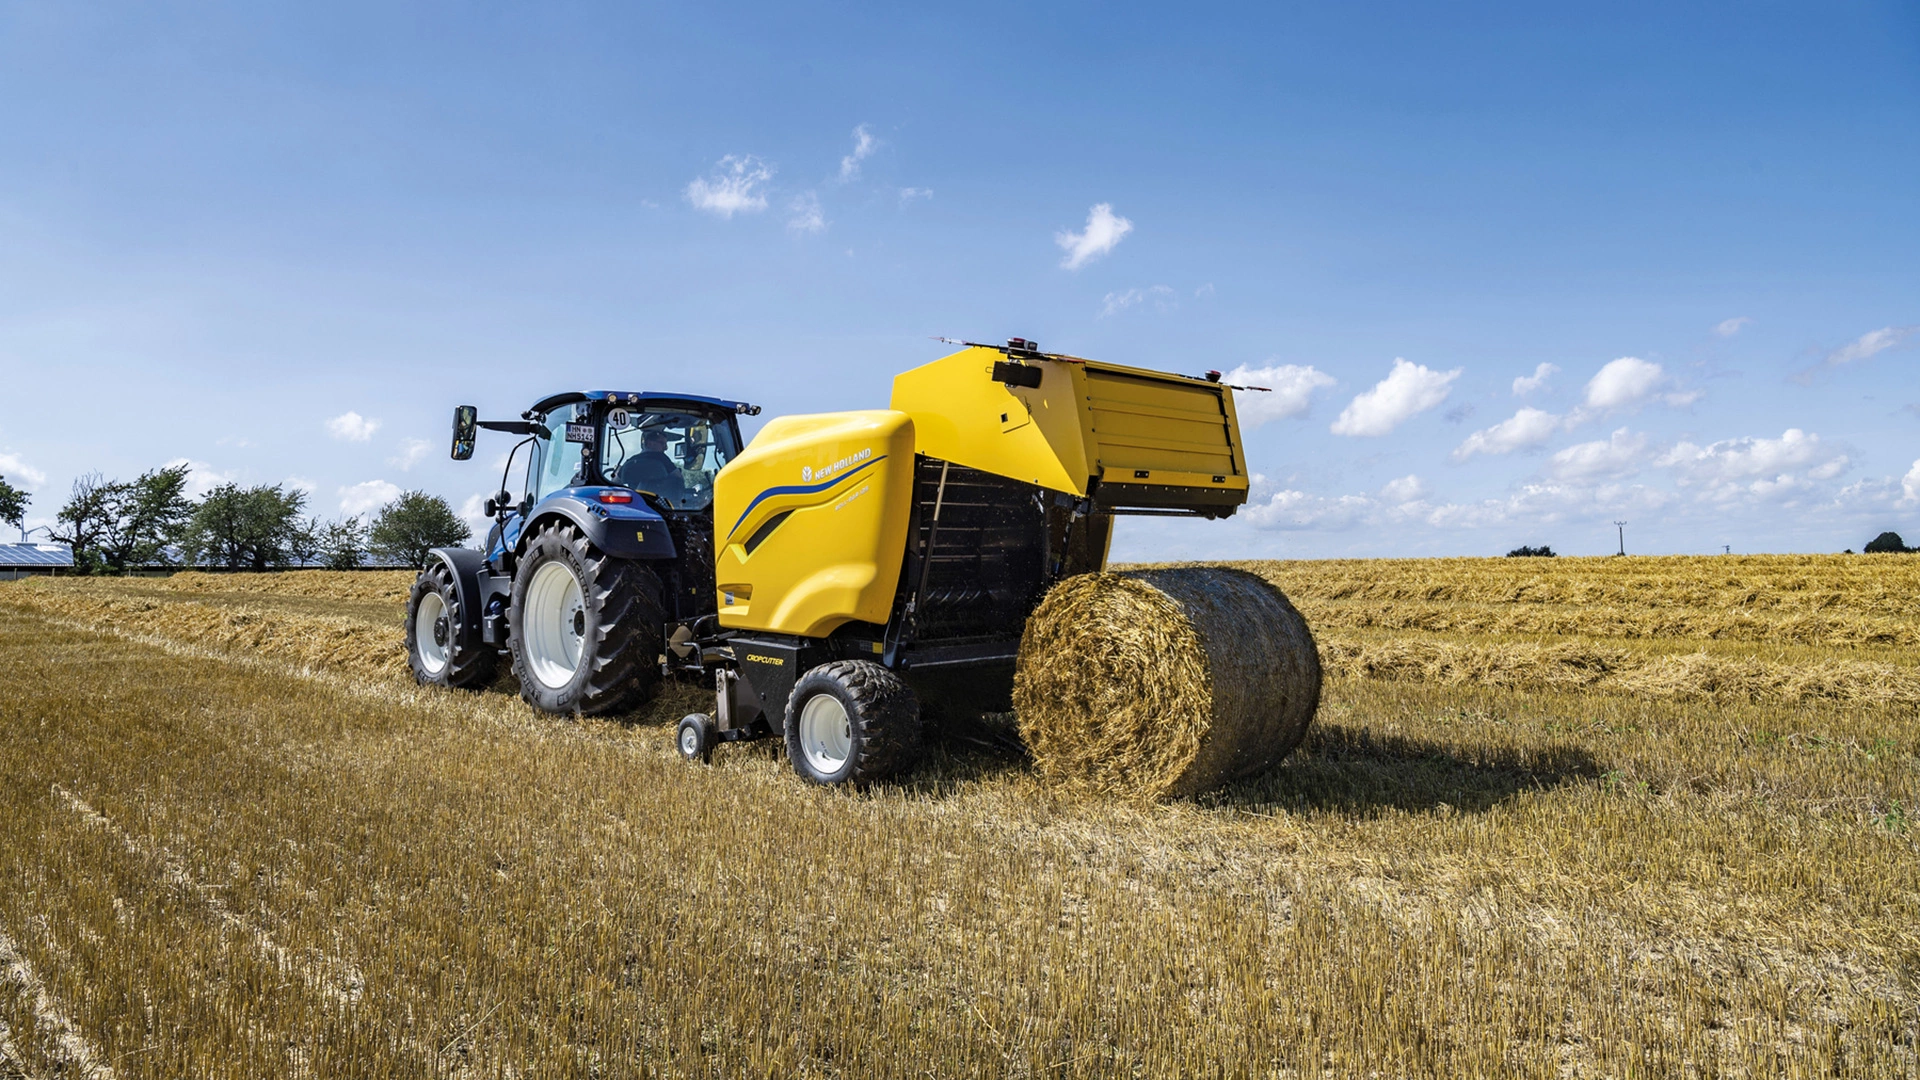 New Holland Tractor working with Roll Bar 125 round baler